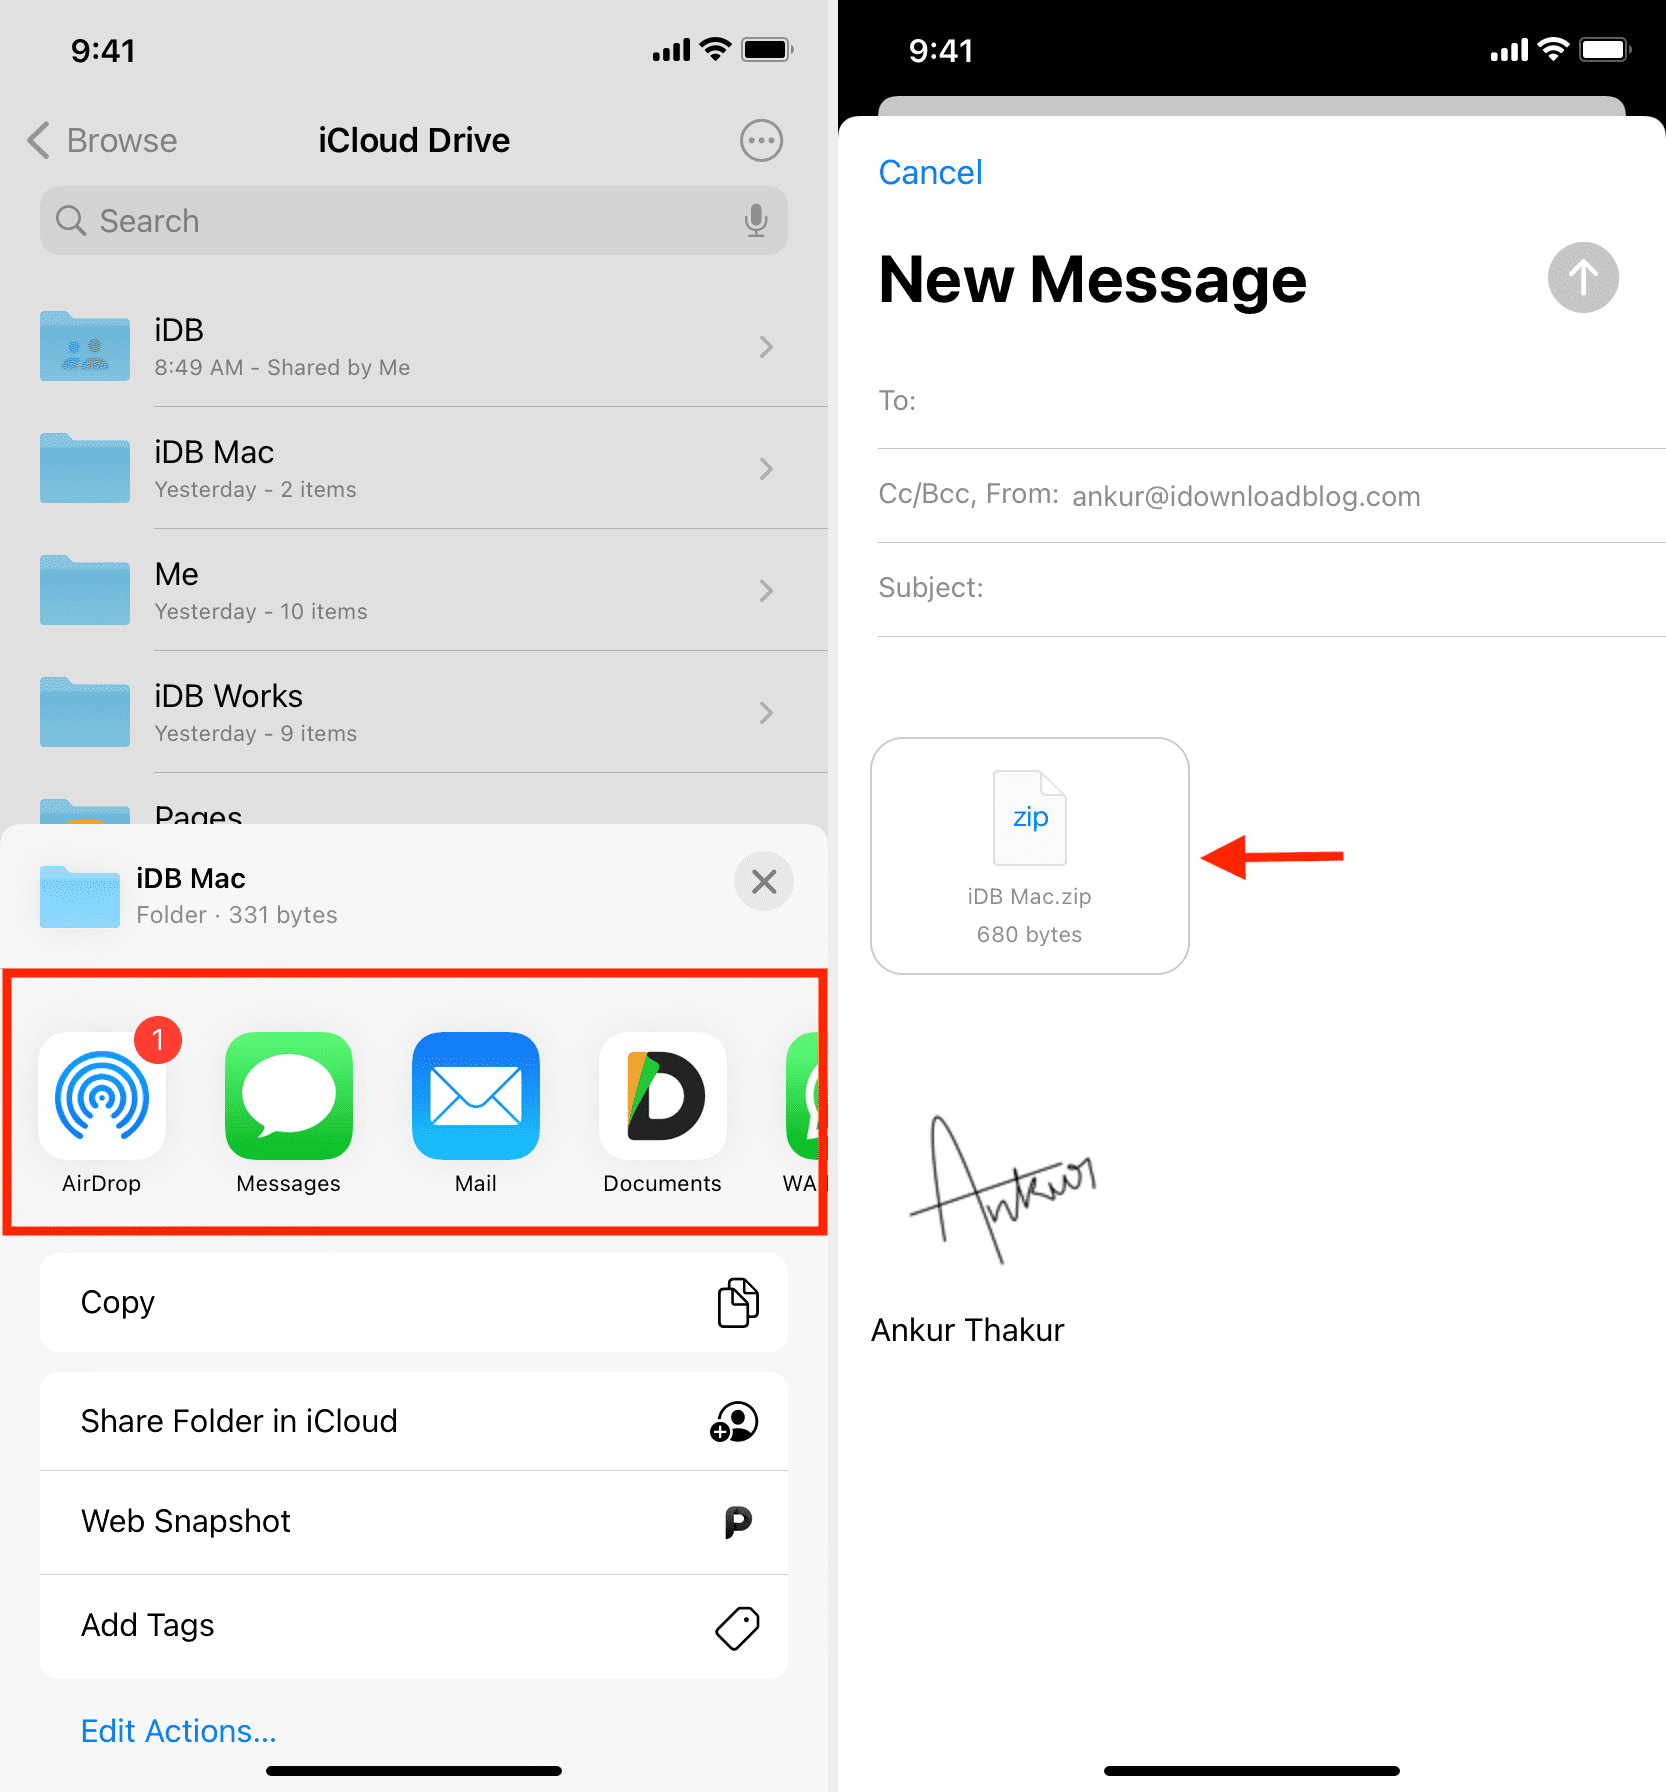 Normal folder sharing in Files app on iPhone